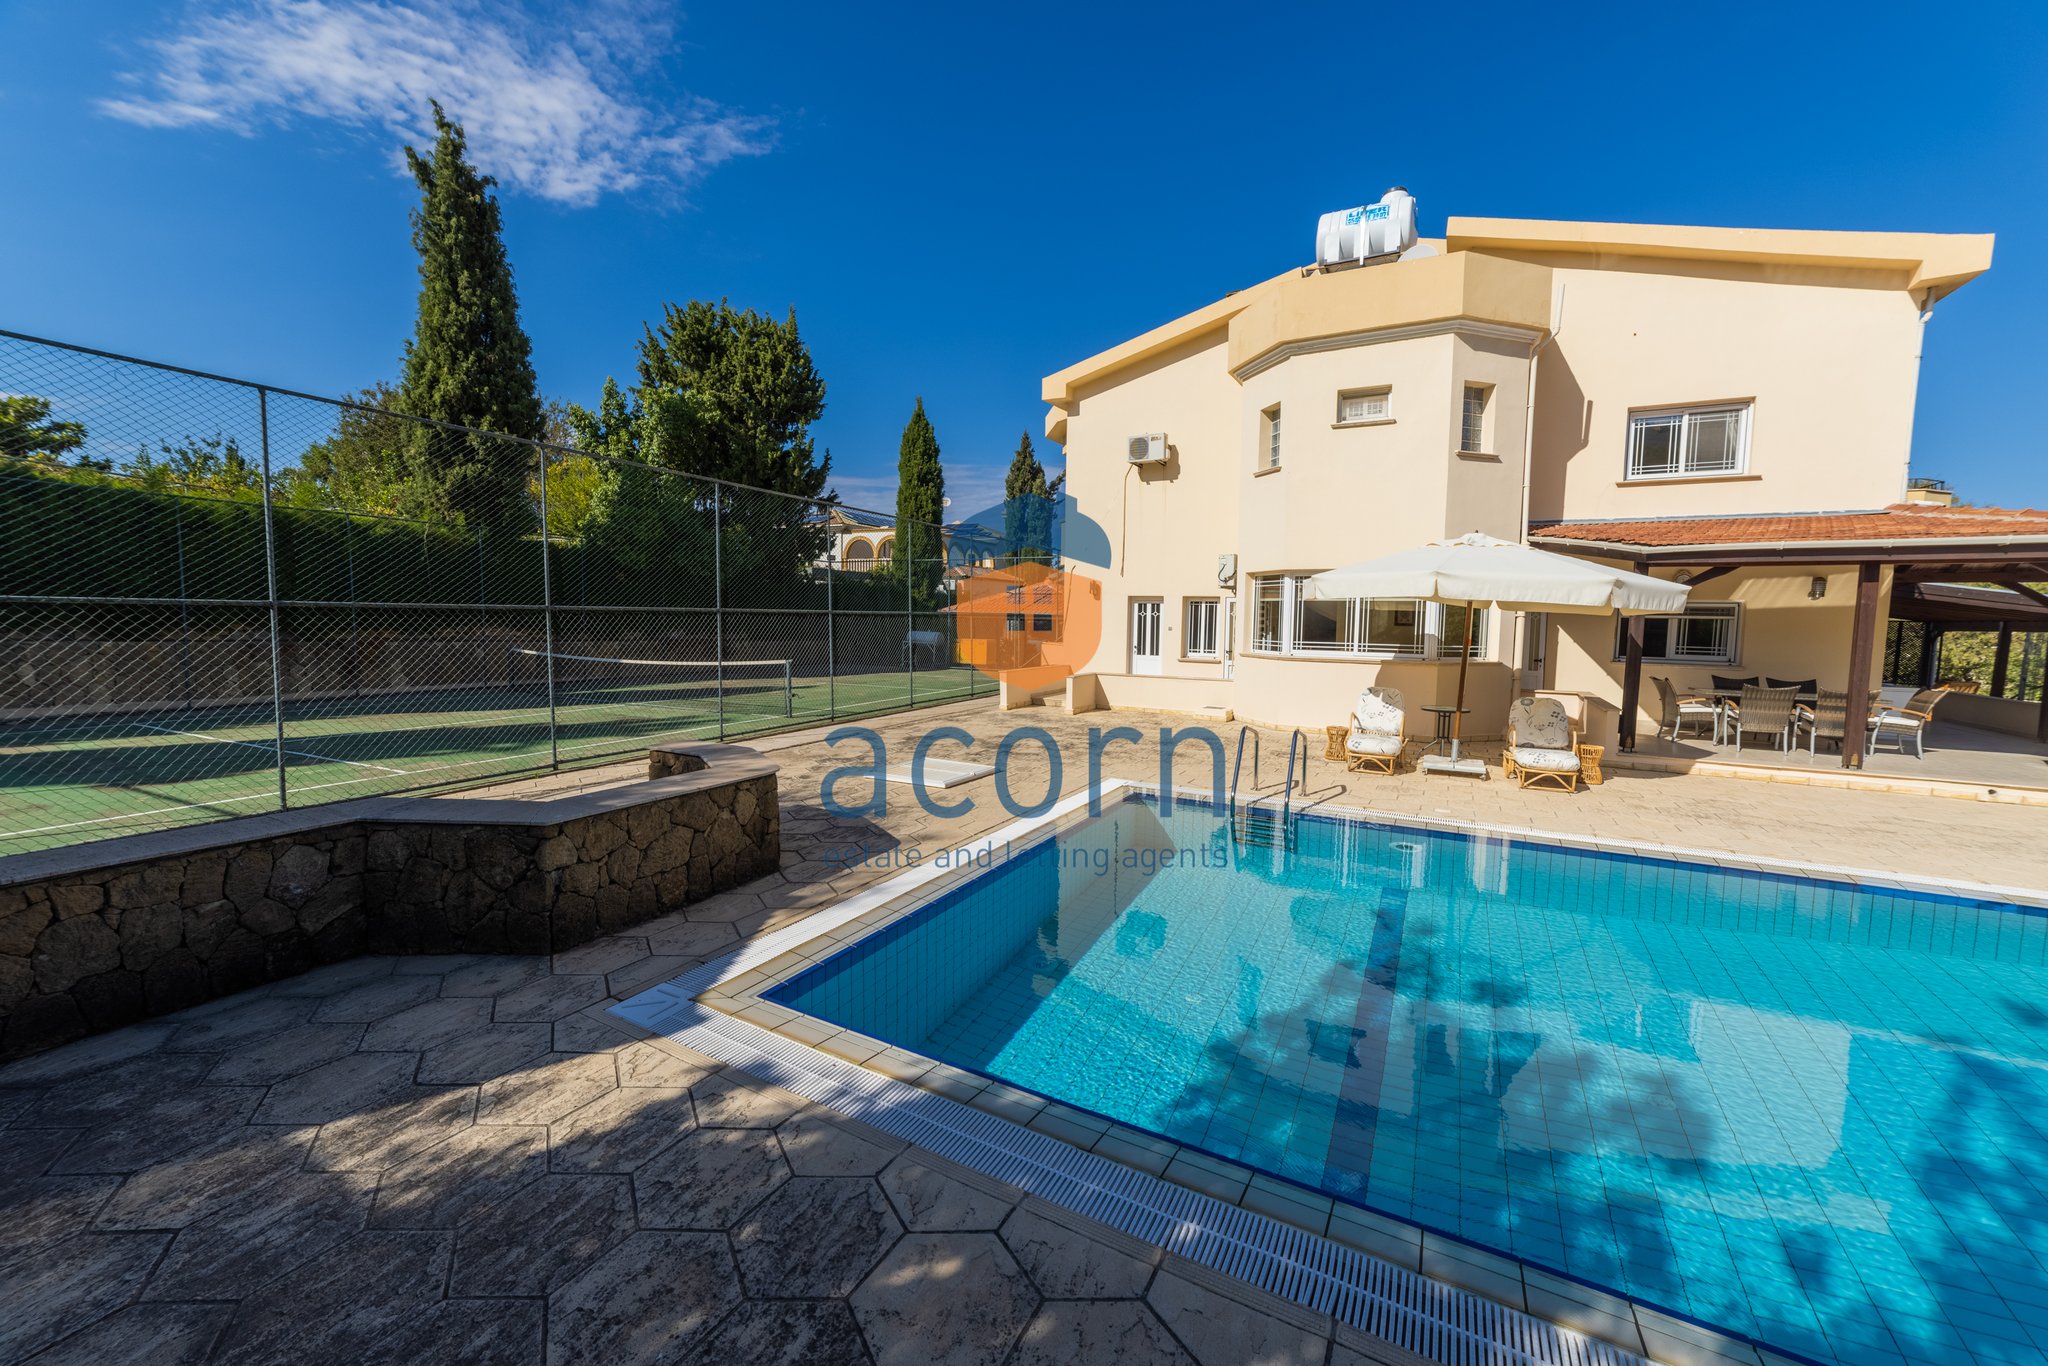 Stunning bright and airy pool villa with Tennis Court in sought after Yesiltepe, Yesiltepe